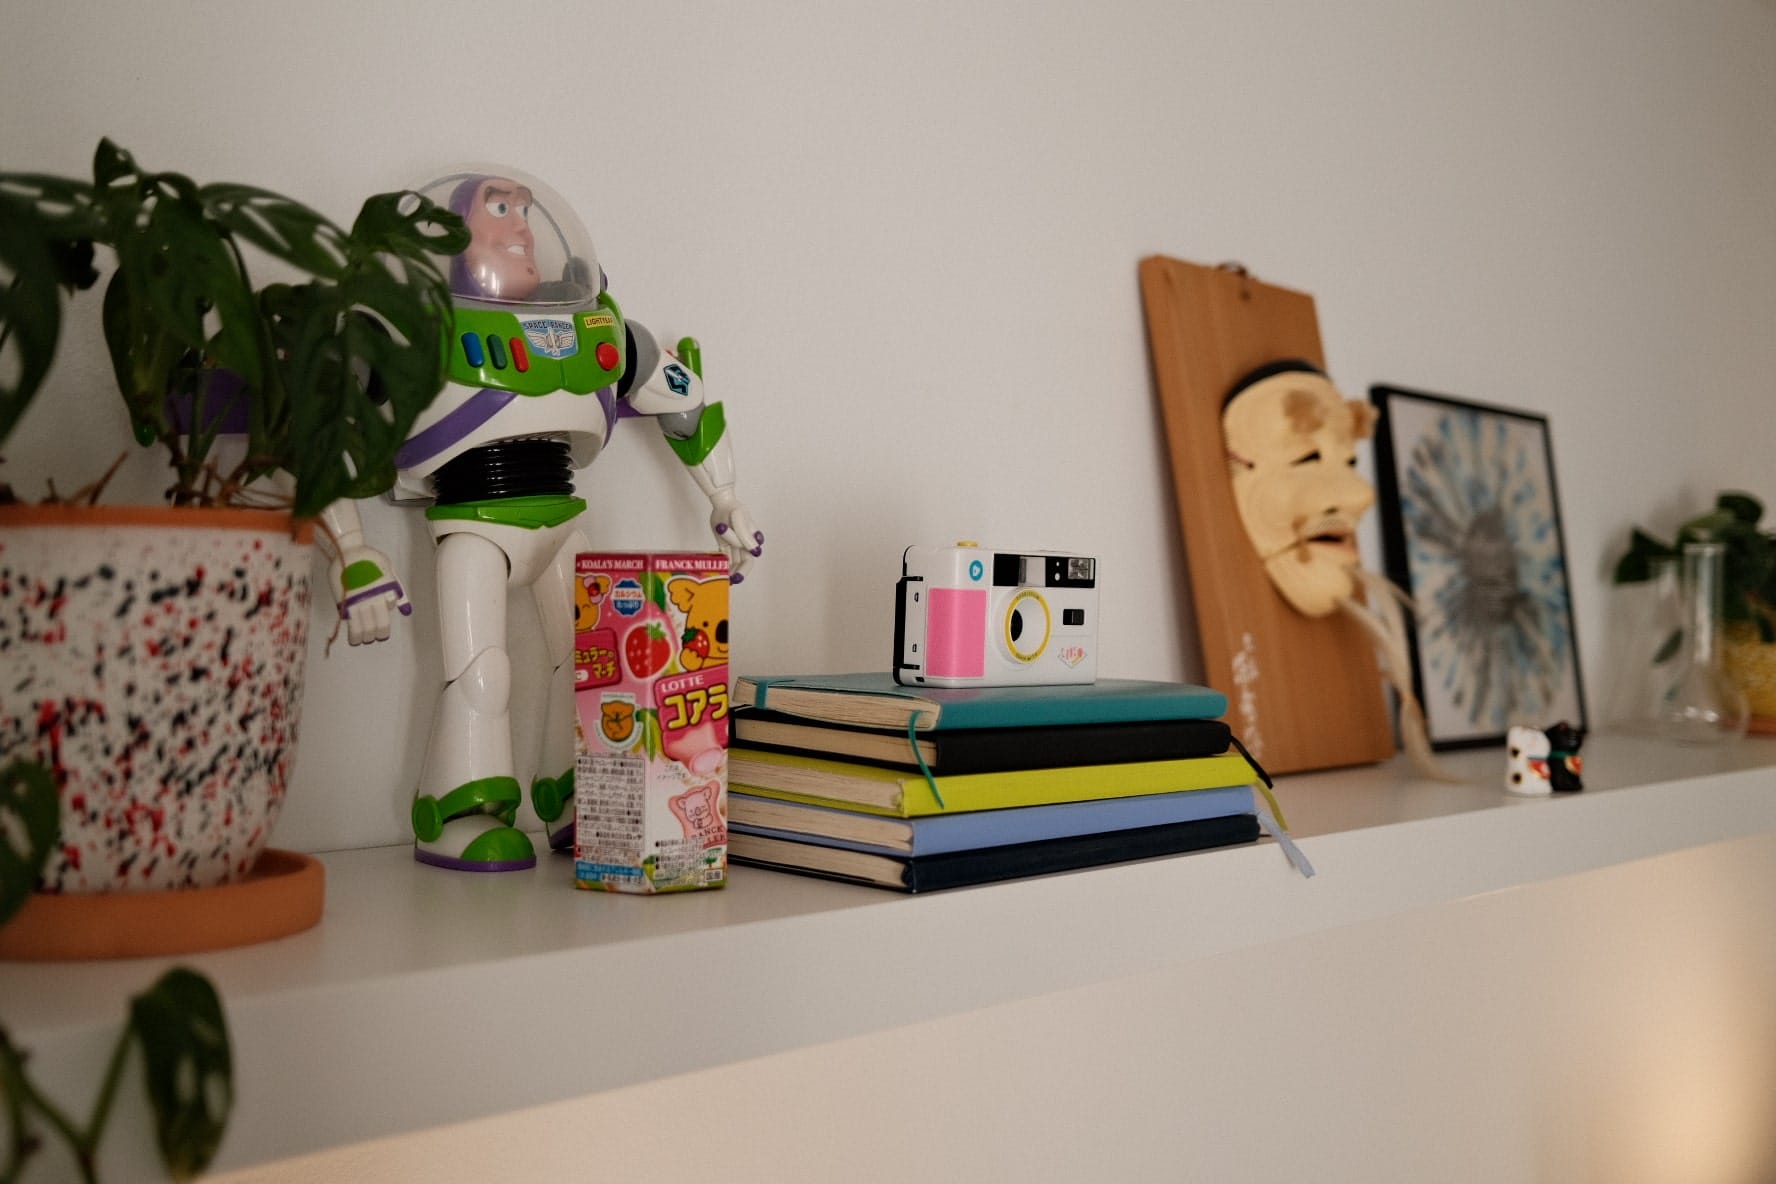 A shelf adorned with an action figure, a potted plant, a colourful instant camera on top of stacked notebooks, and decorative items including a wooden mask and framed artwork